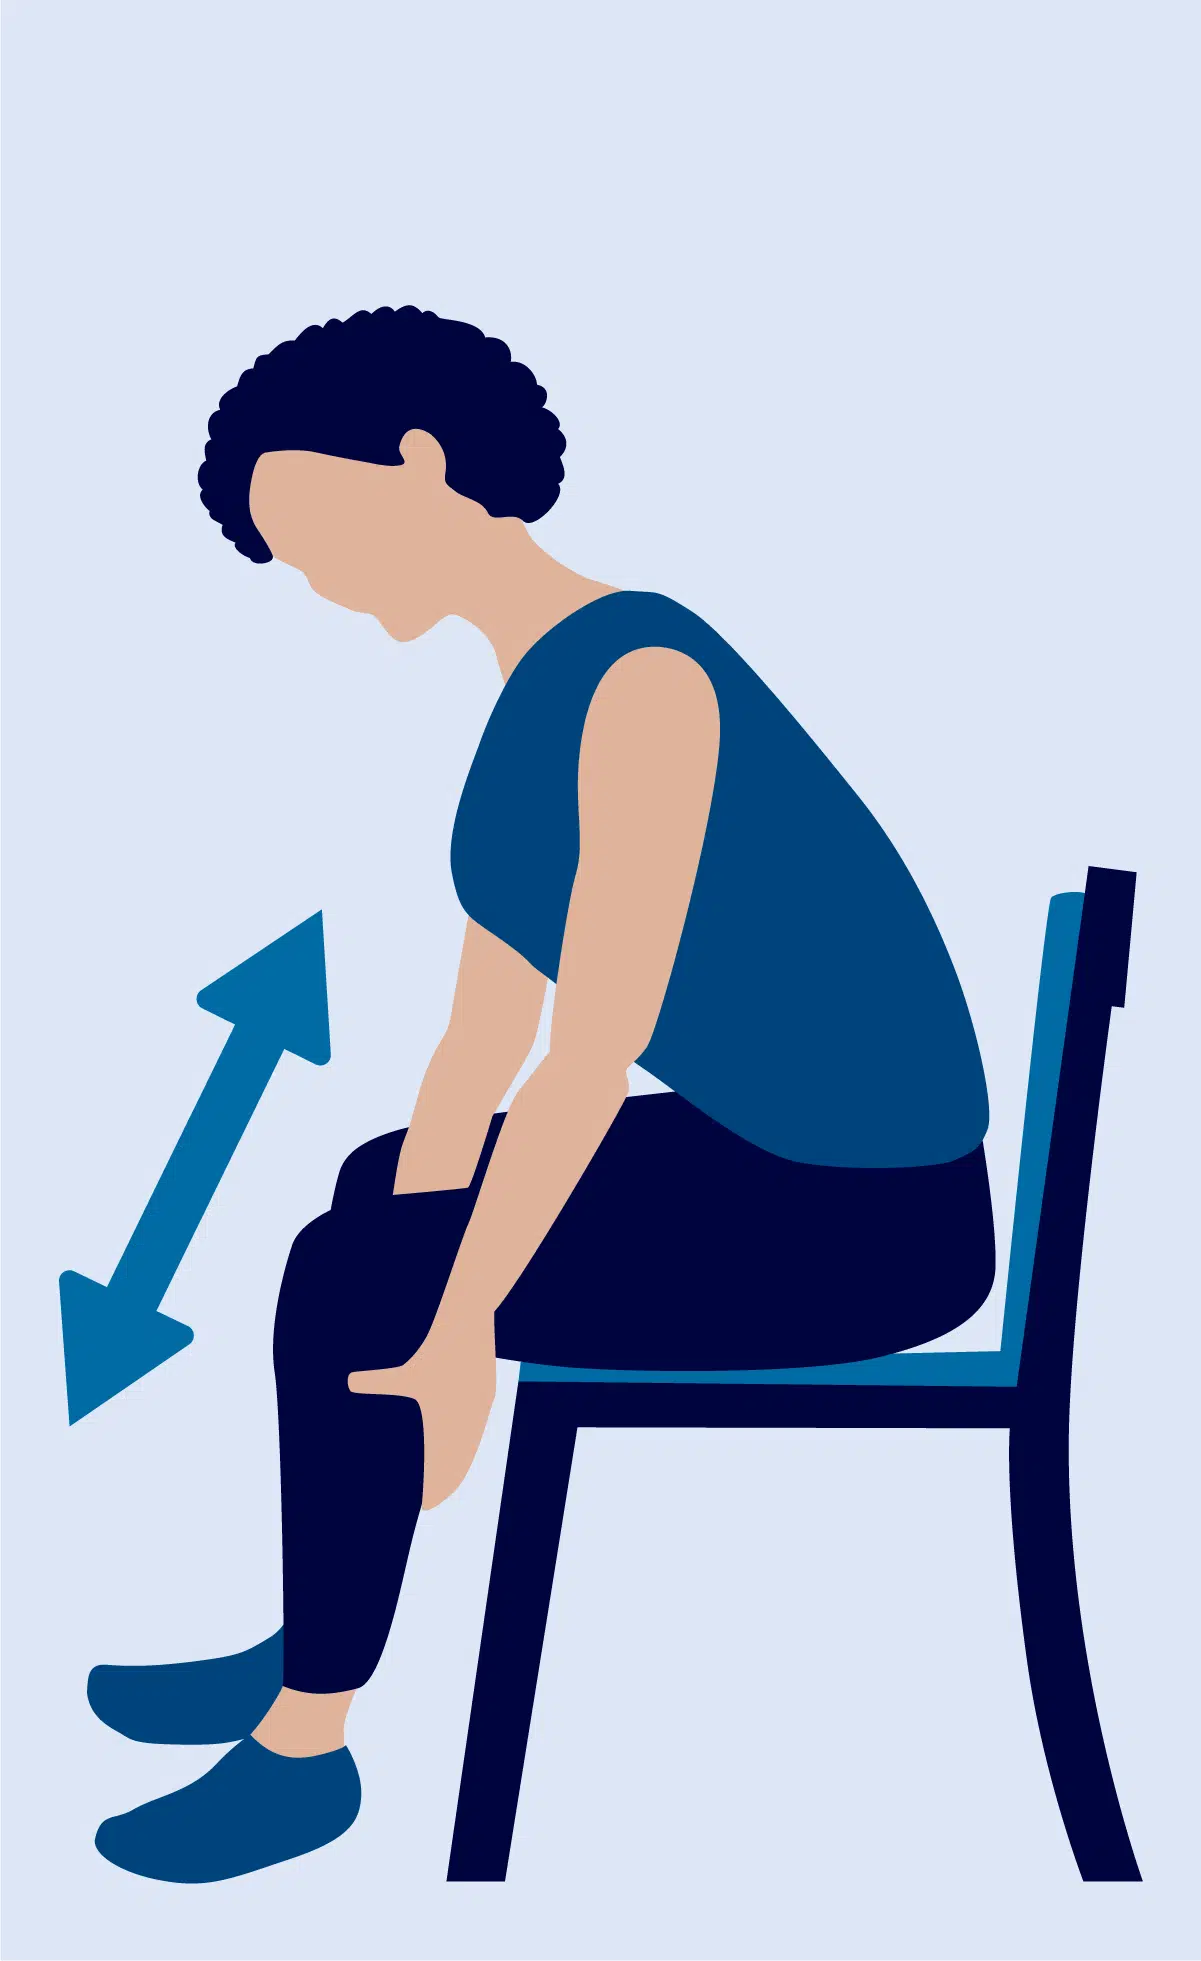 View source image  Senior fitness, Chair exercises, How to stay healthy